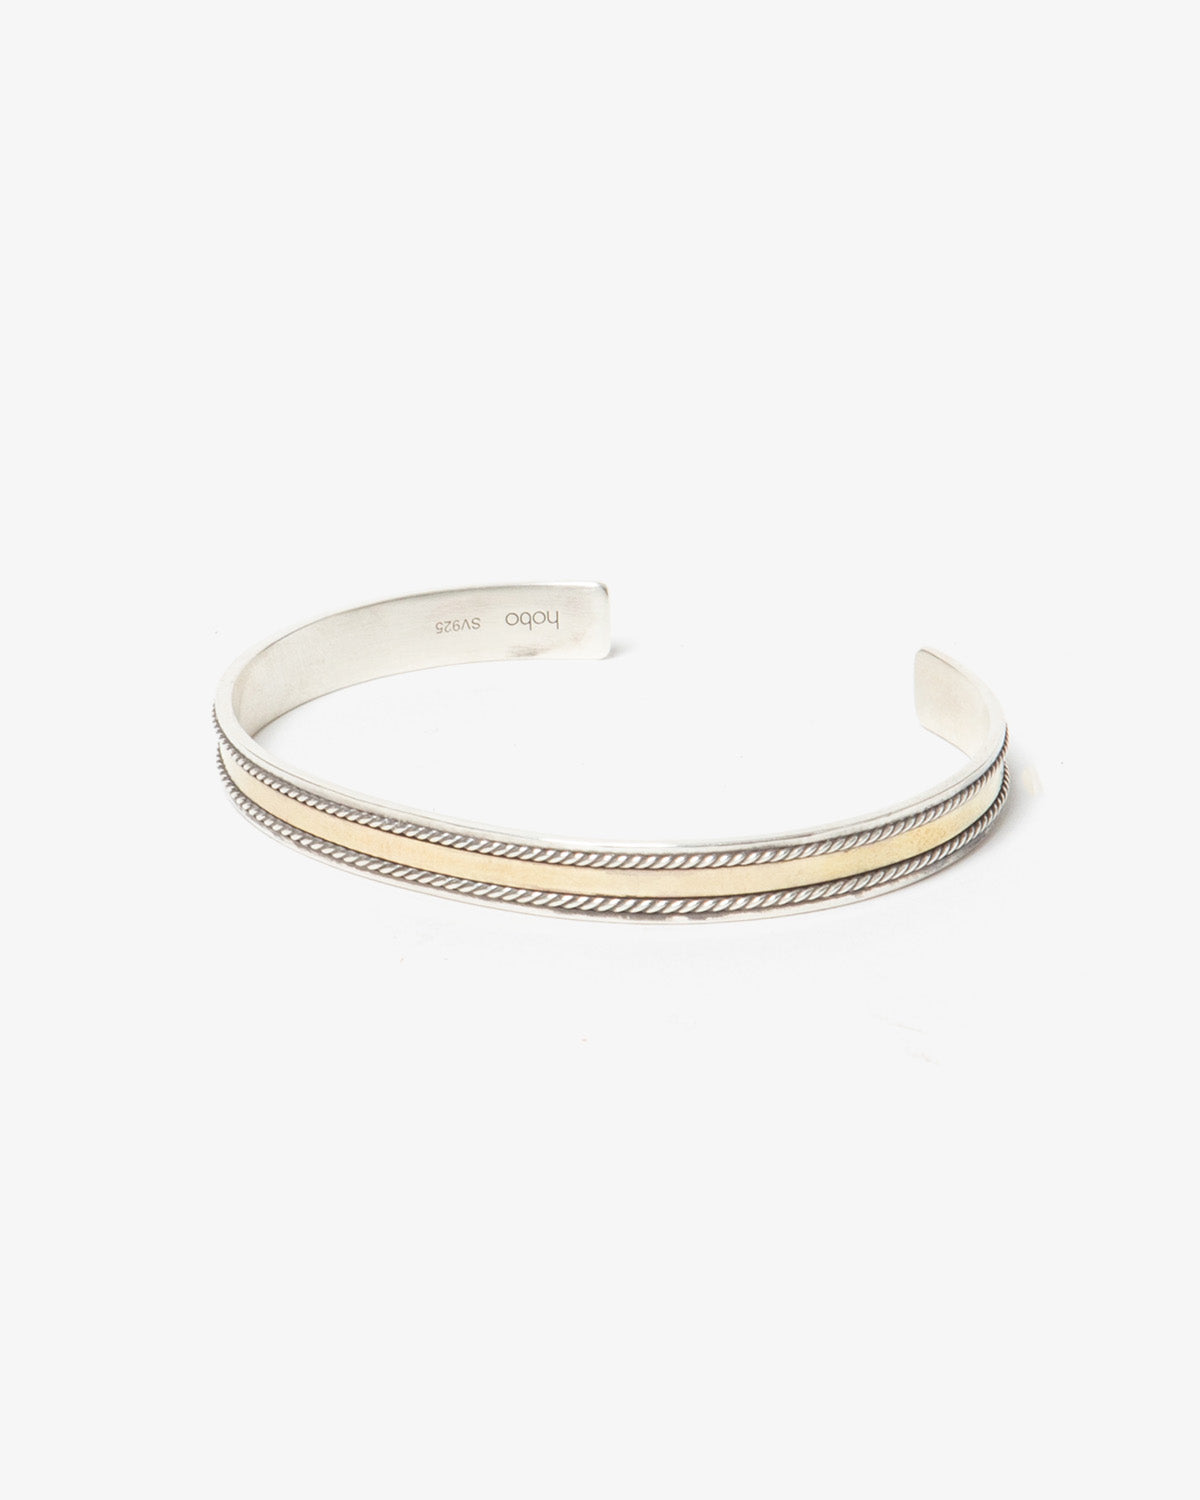 ROPE BRACELET 925 SILVER with BRASS